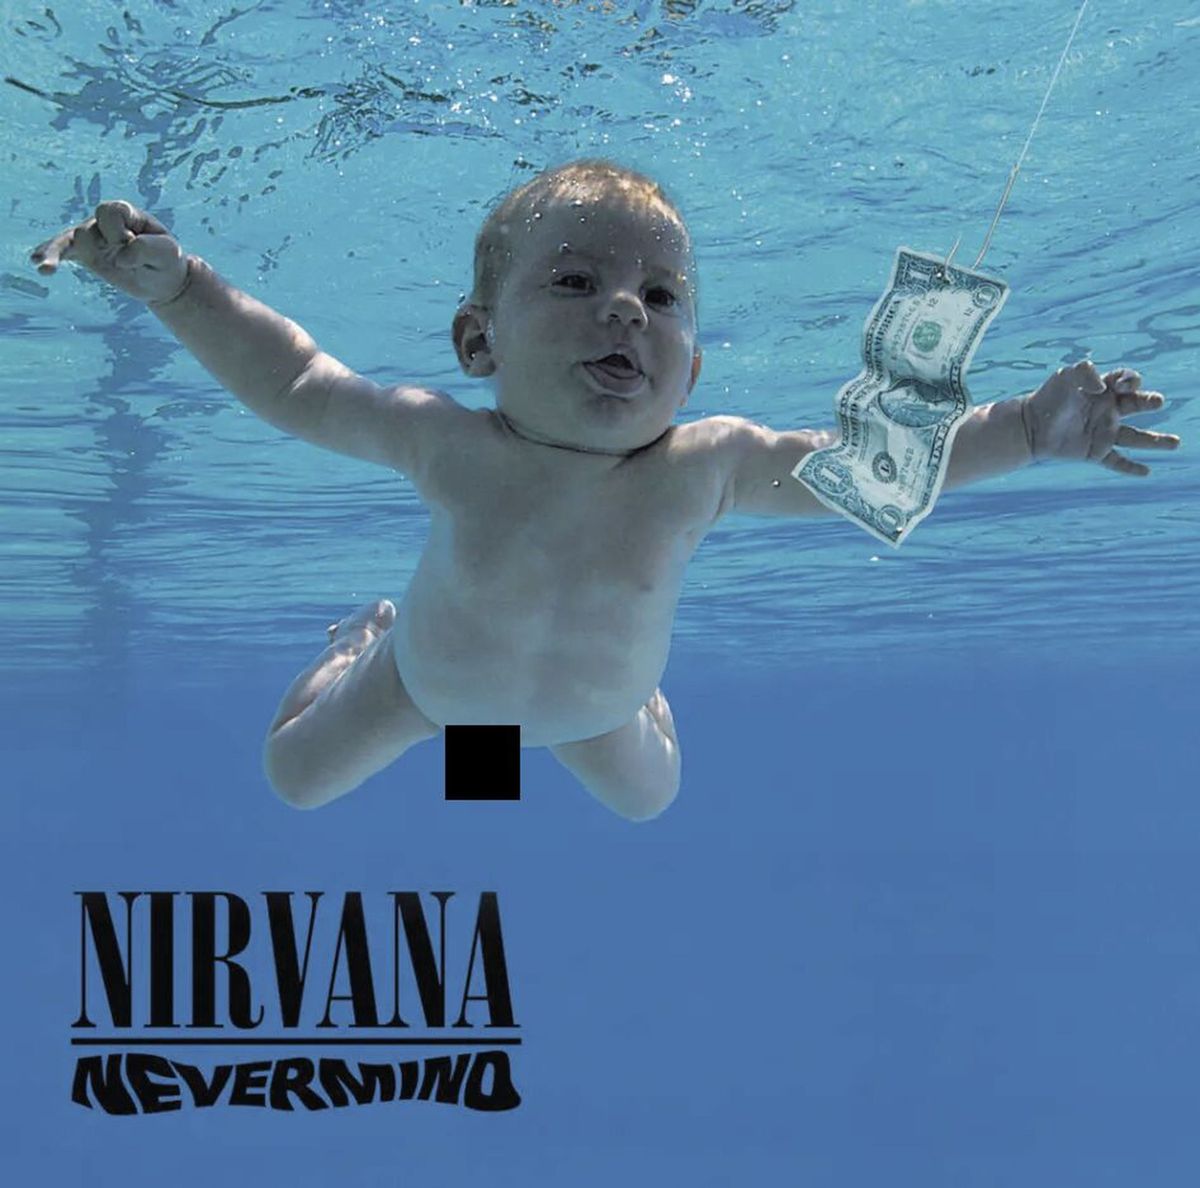 Nirvana’s “Nevermind” was released on Sept. 24, 1991. 